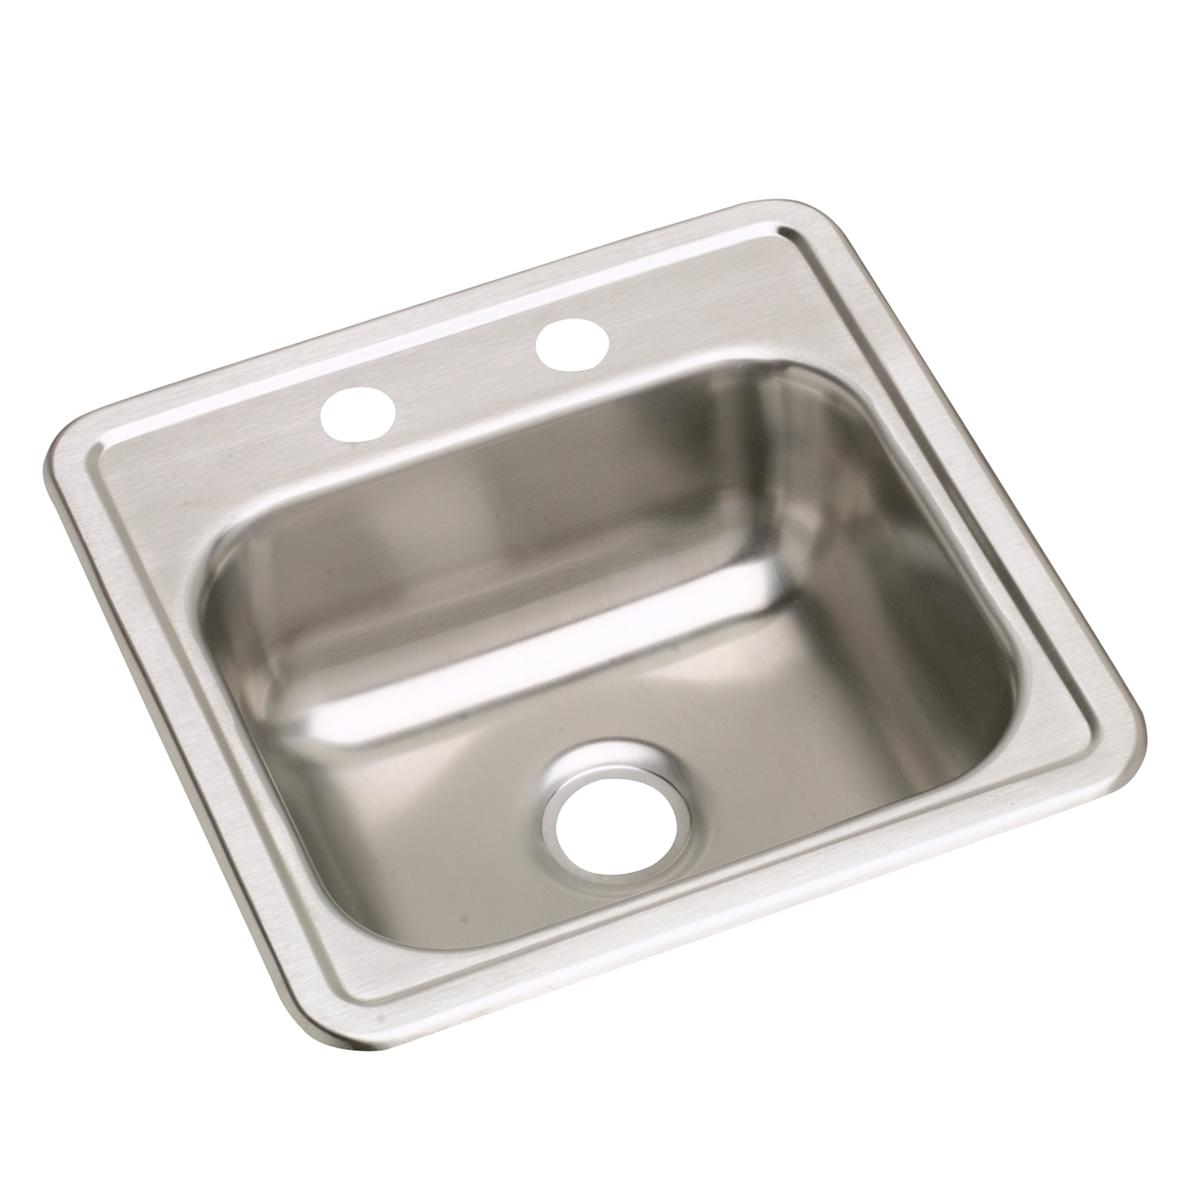 Elkay Dayton Stainless Steel 15" x 15" x 5-3/16", 2-Hole Single Bowl Drop-in Bar Sink with 2" Drain Opening